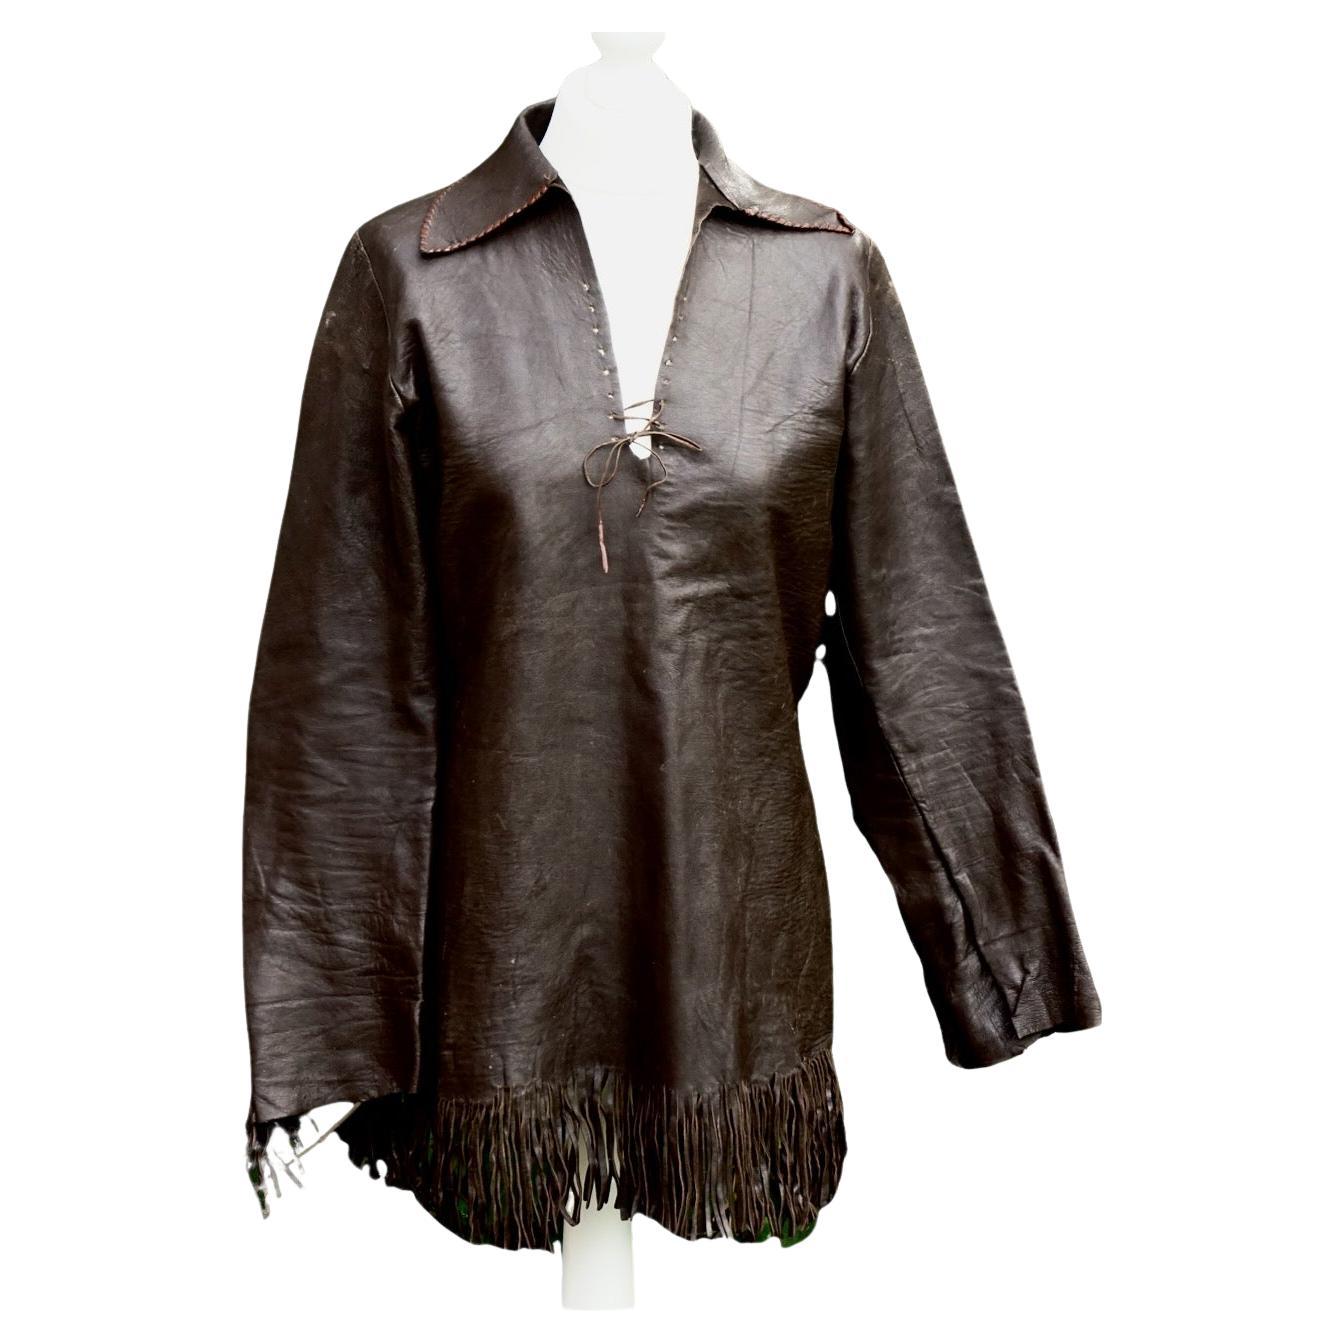 Soft Brown Leather Fringed Top from Lord John of Carnaby Street, London, 1960s For Sale